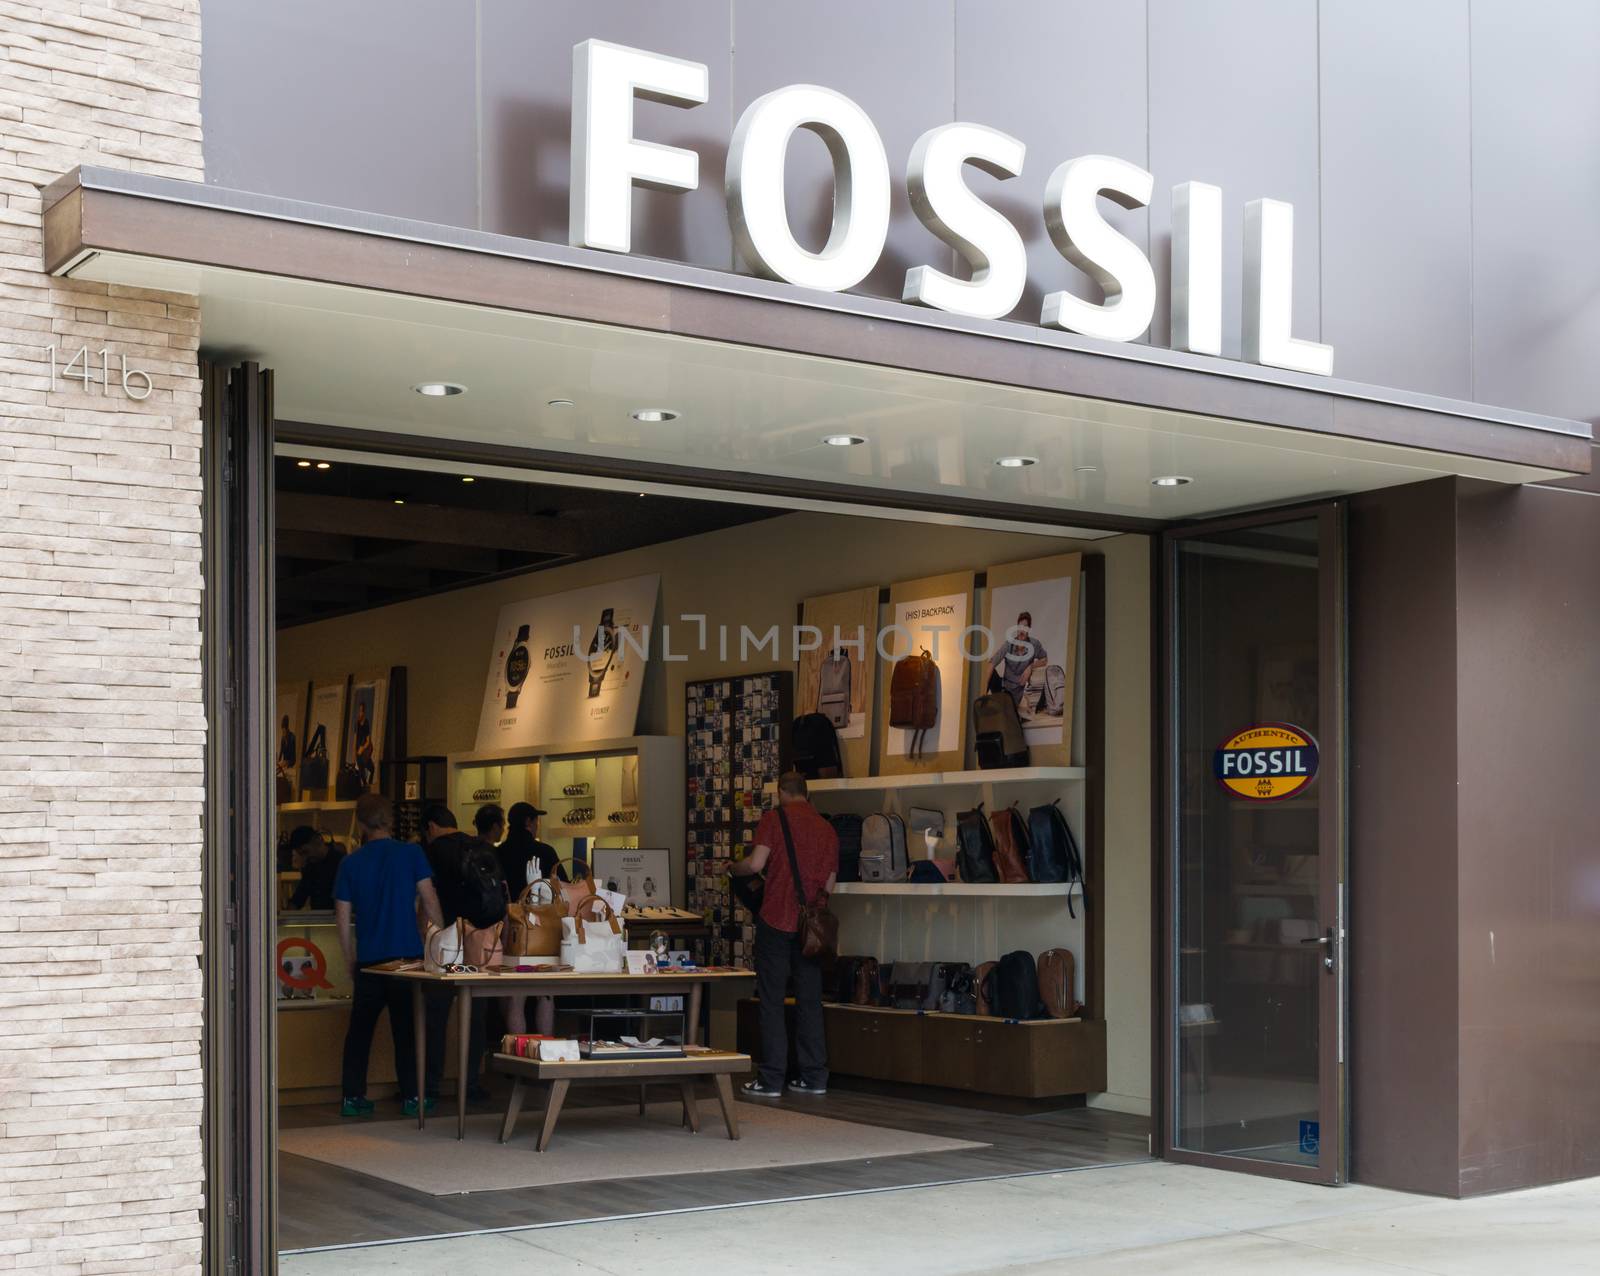 Fossil Store Exterior and Sign by wolterk